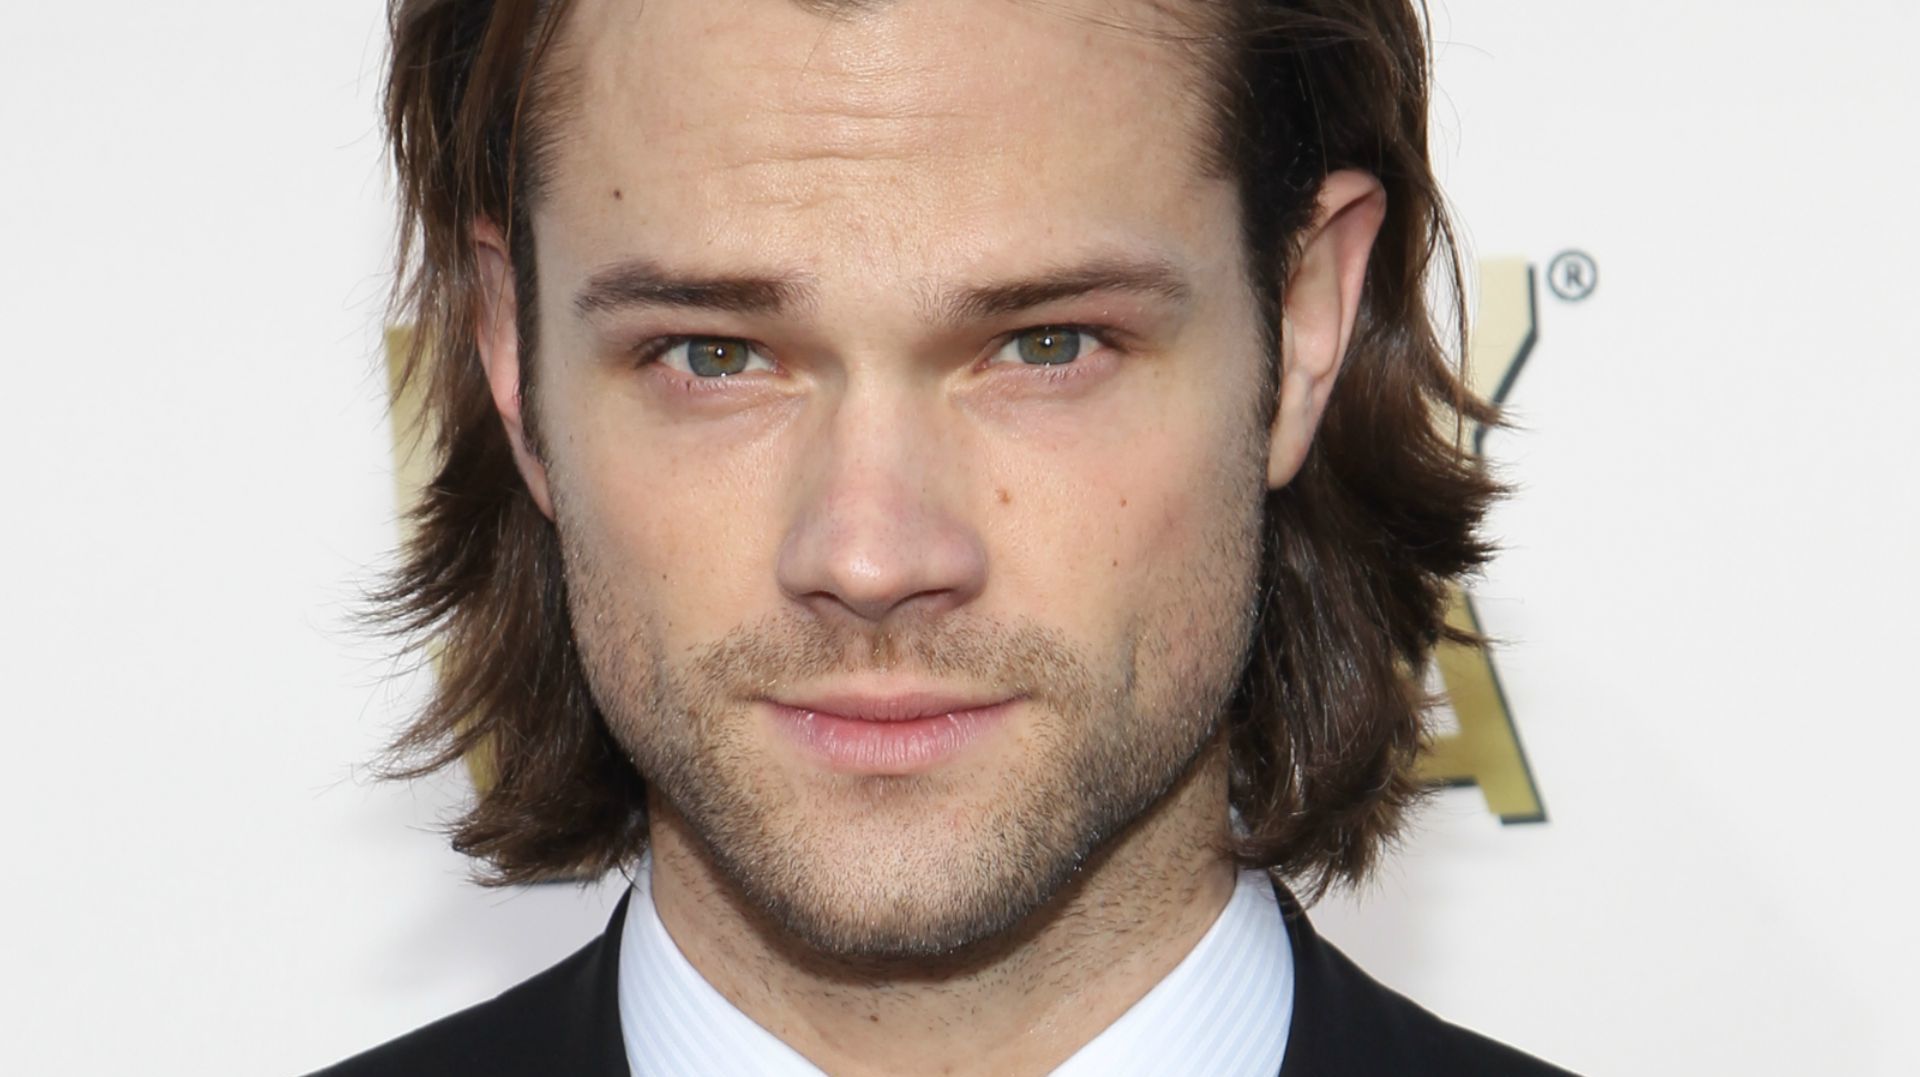 Jared Padalecki Backgrounds, Compatible - PC, Mobile, Gadgets| 1920x1077 px